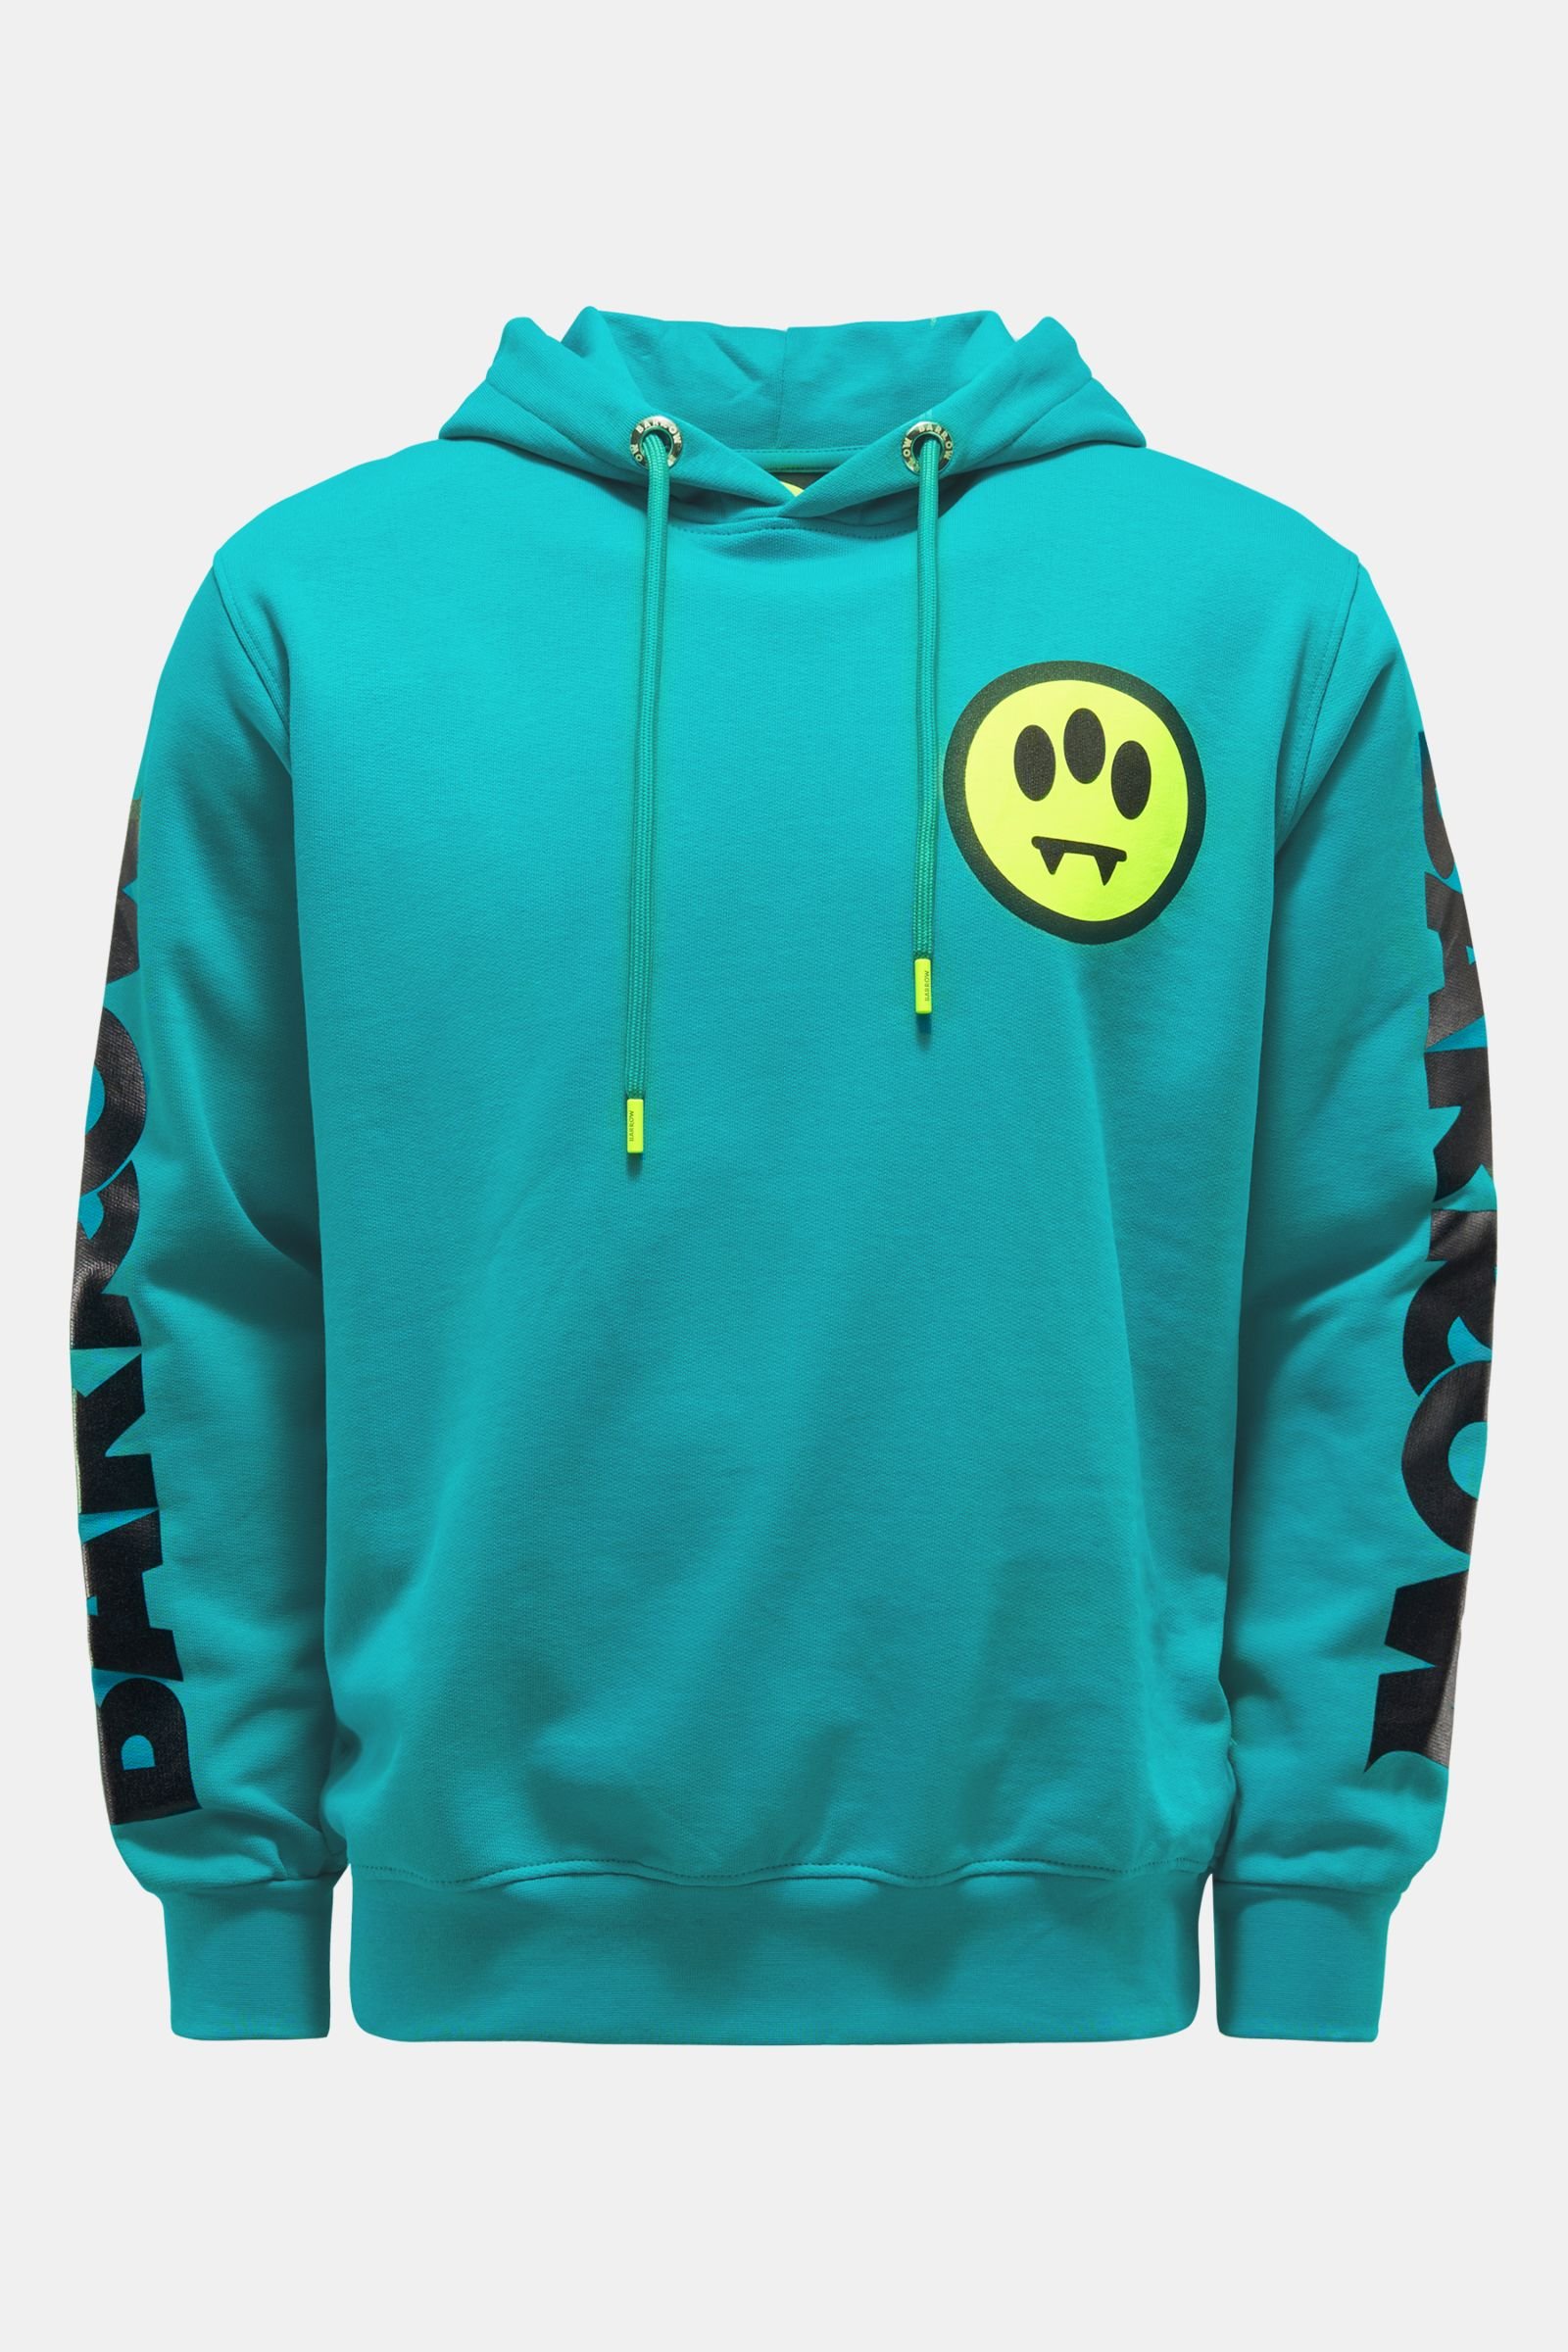 Hooded jumper turquoise